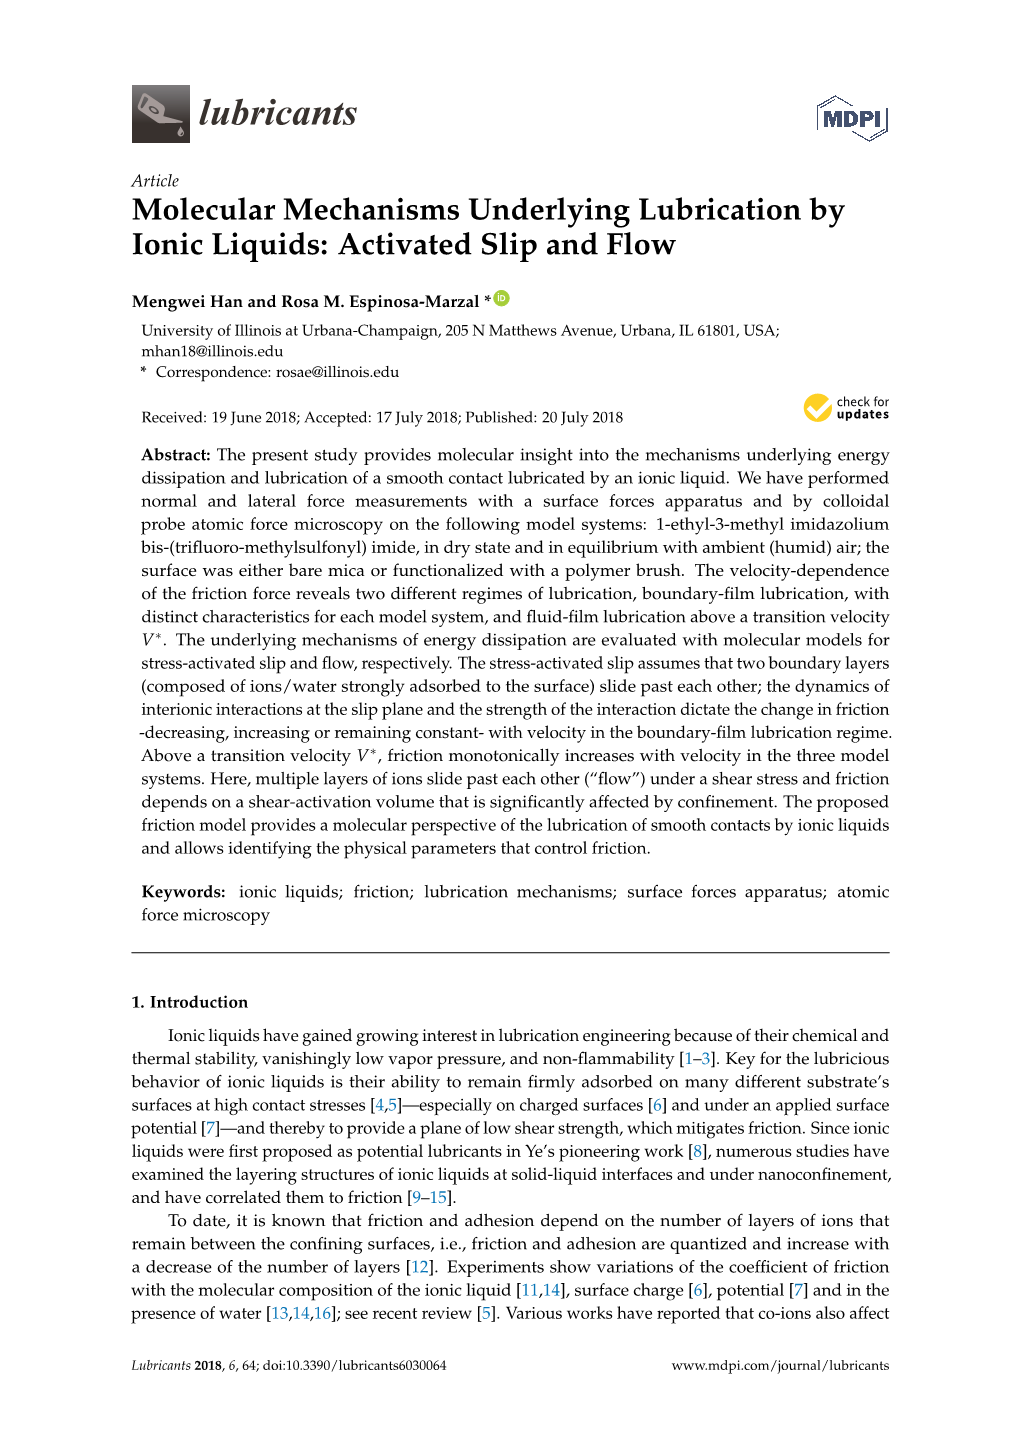 Molecular Mechanisms Underlying Lubrication by Ionic Liquids: Activated Slip and Flow